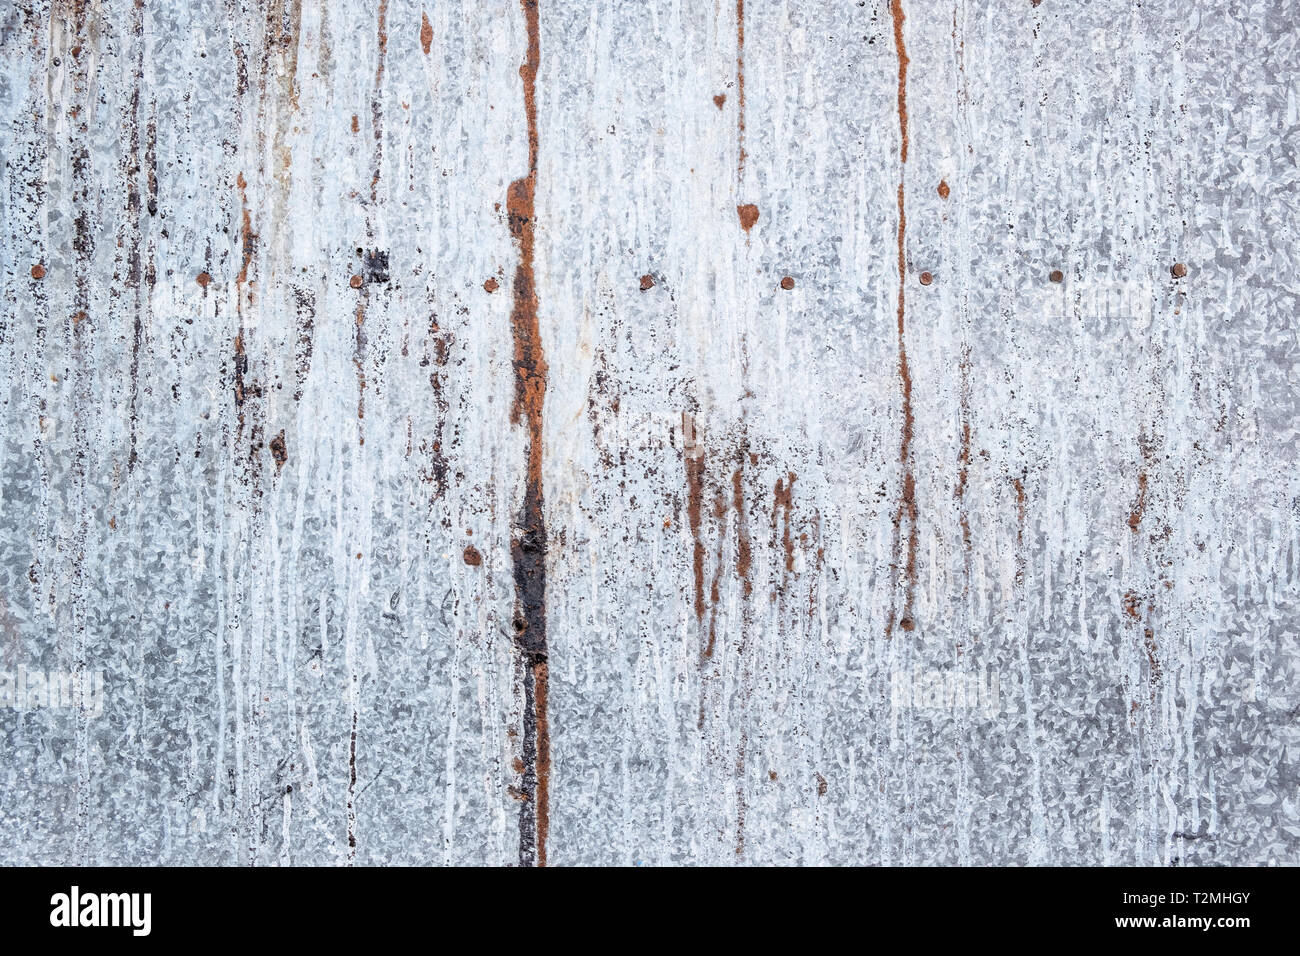 Rusted sheet of metal and grunge texture. Corrosion and oxidized background. Stock Photo